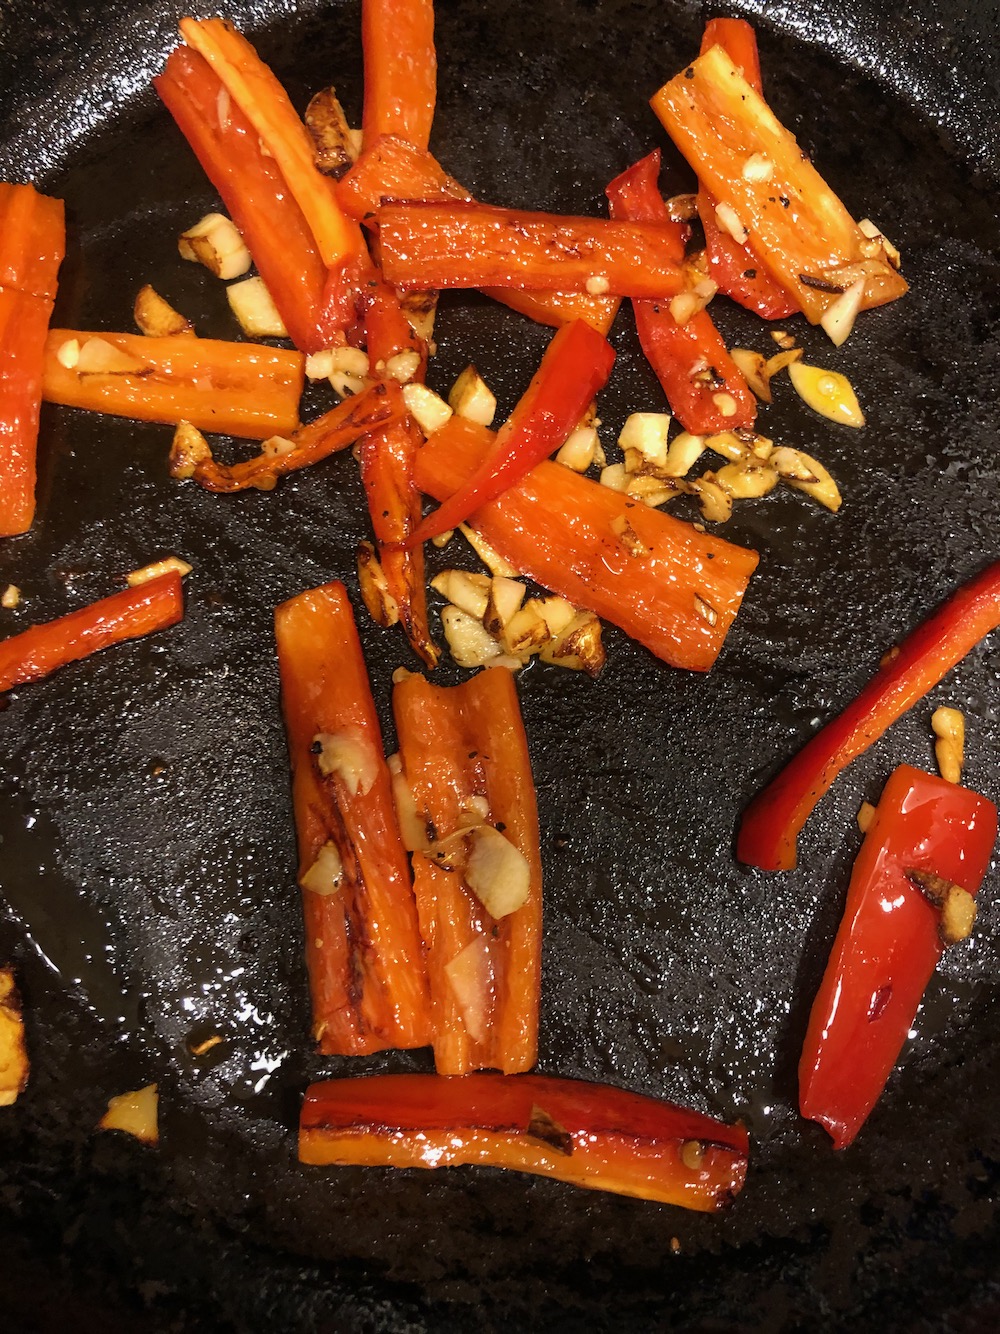 Sautéing the red pepper with garlic.